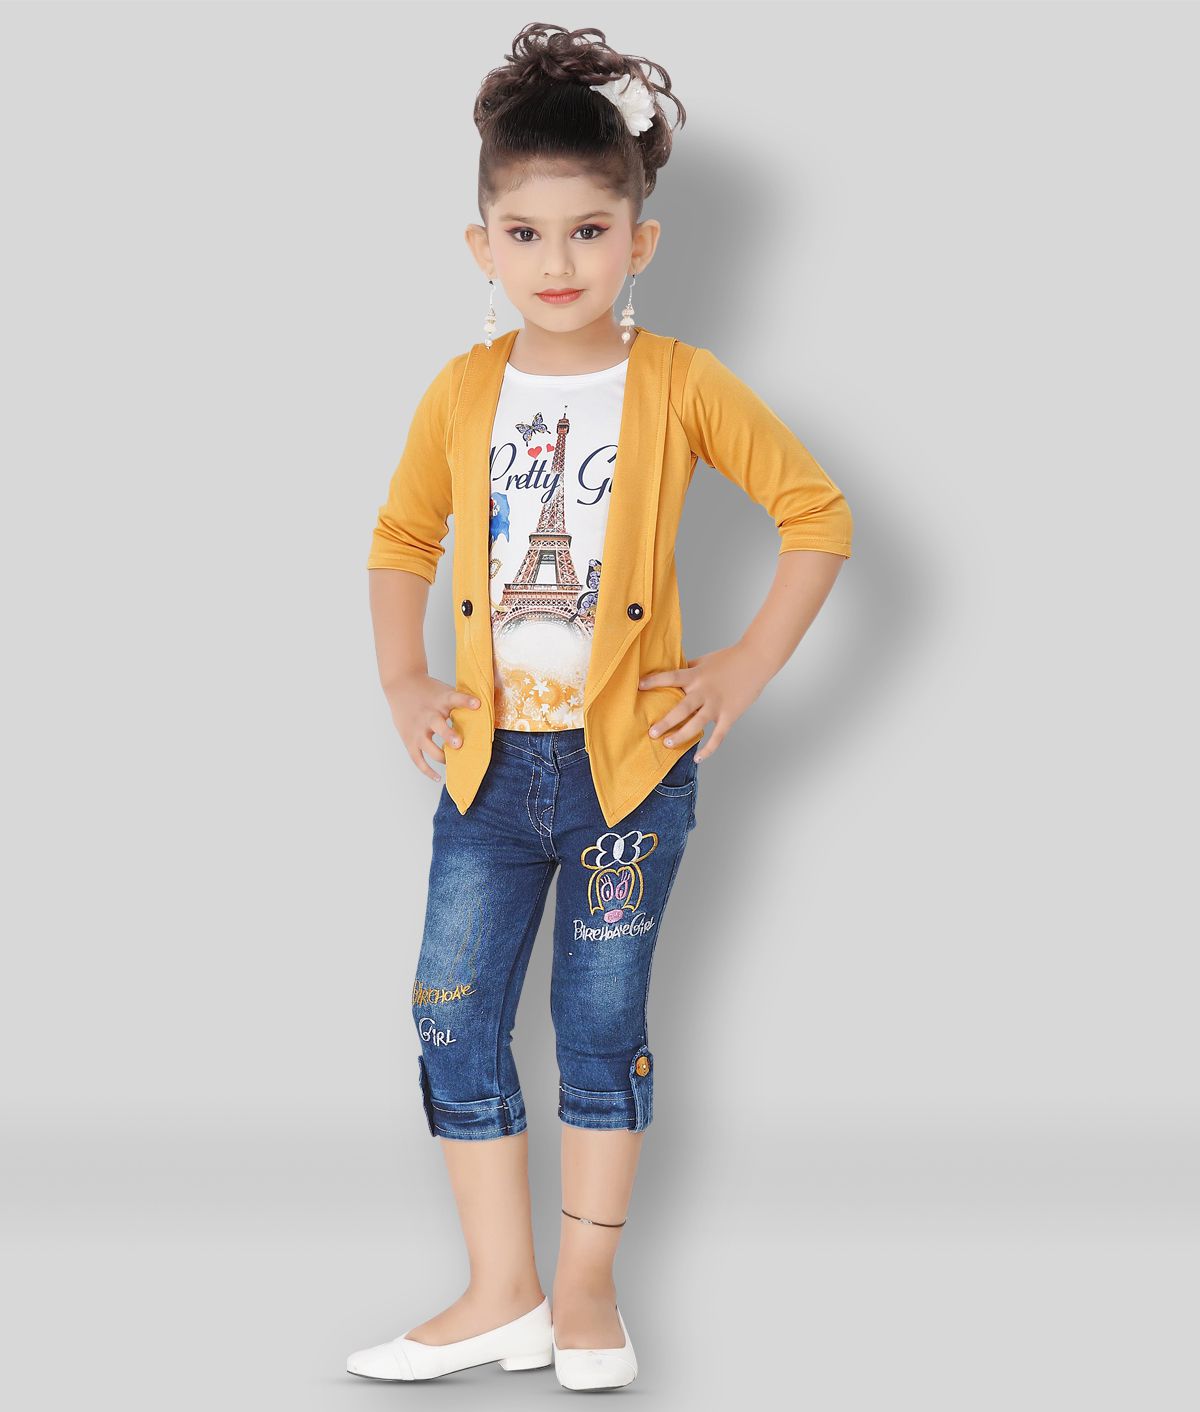     			Arshia Fashions - Yellow Denim Girls Top With Capris ( Pack of 1 )